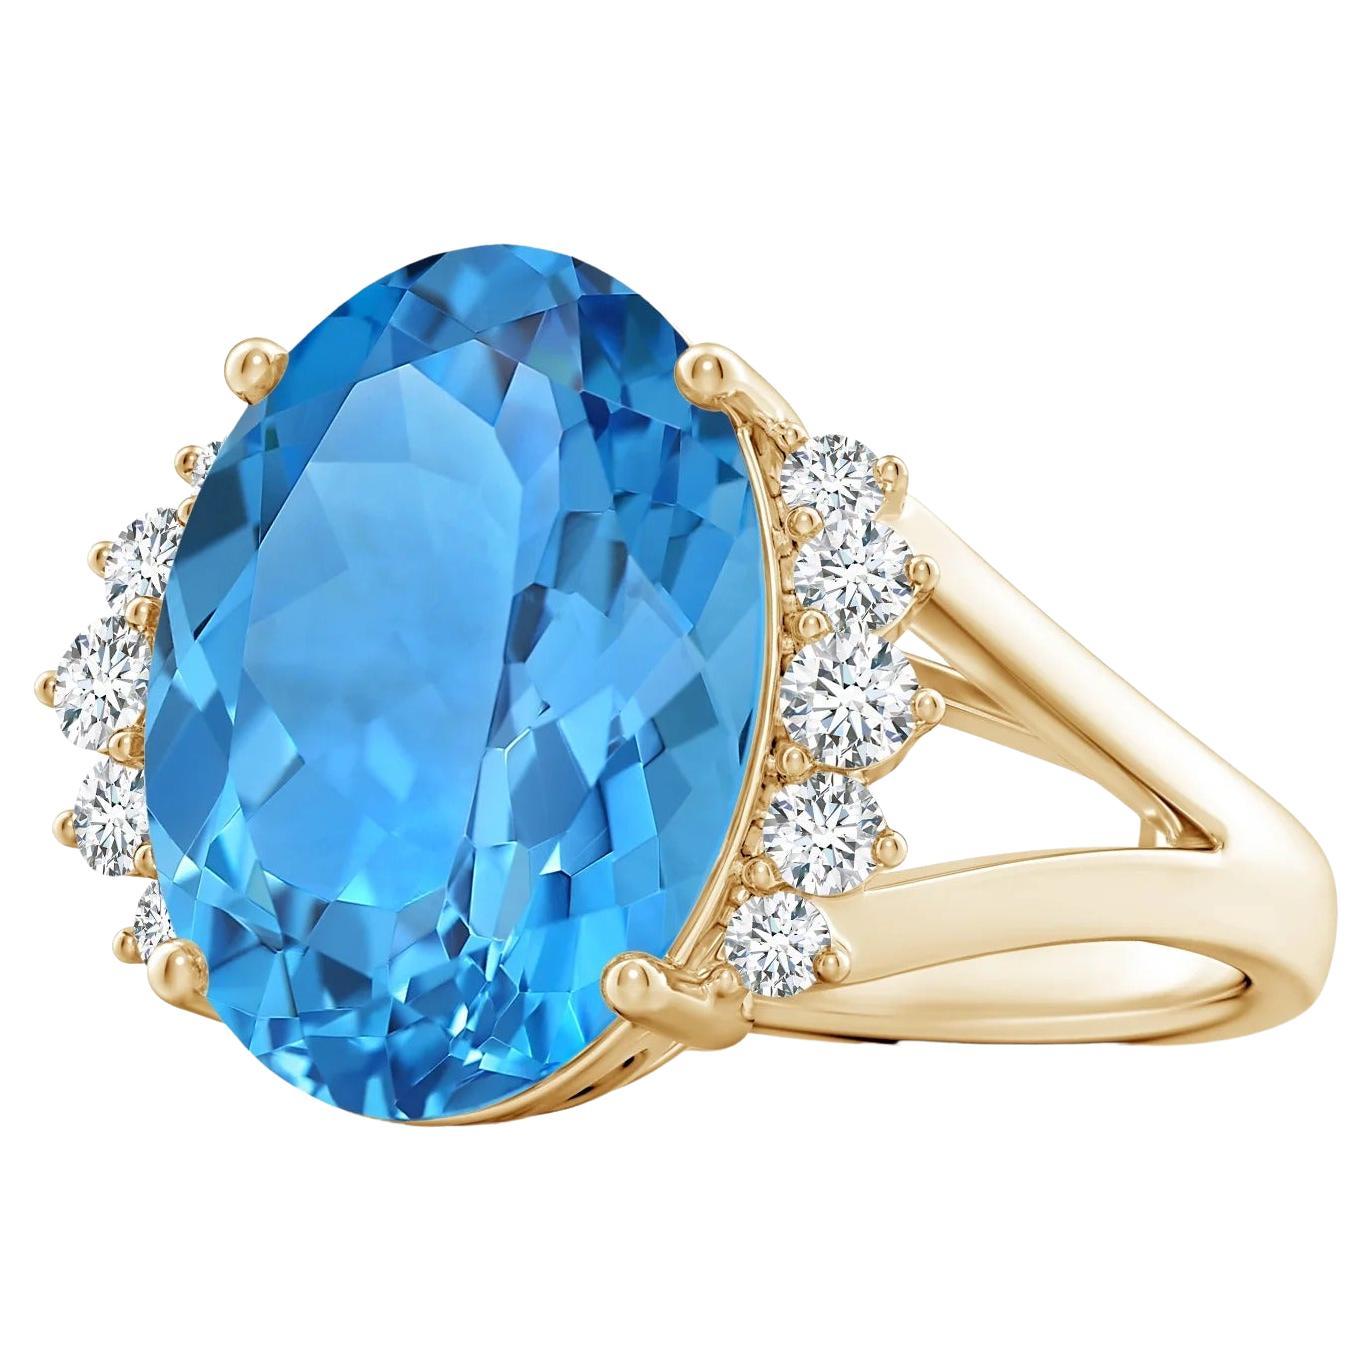 For Sale:  GIA Certified Natural Swiss Blue Topaz Ring in Yellow Gold with Diamonds